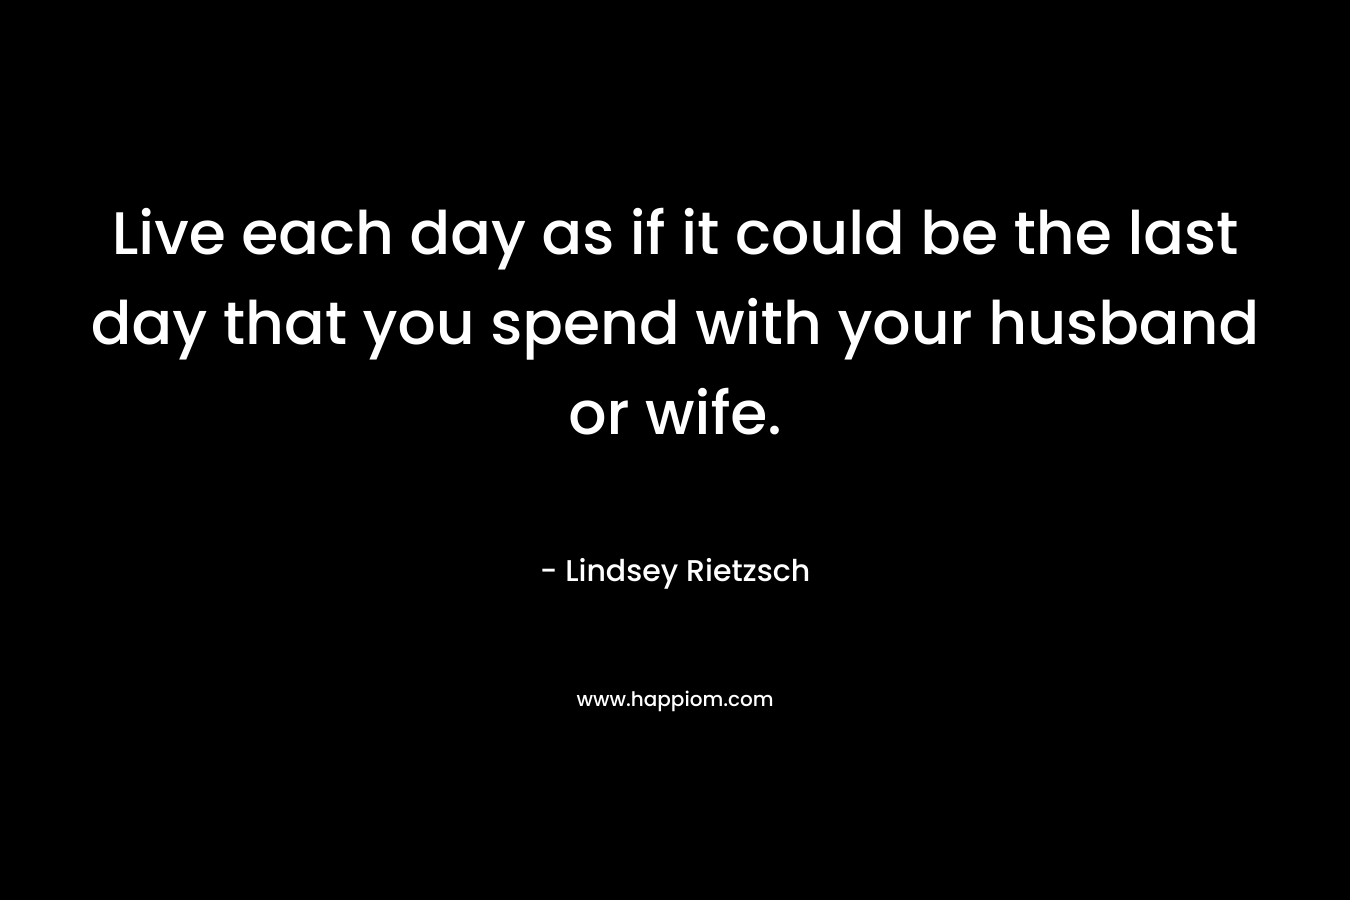 Live each day as if it could be the last day that you spend with your husband or wife.